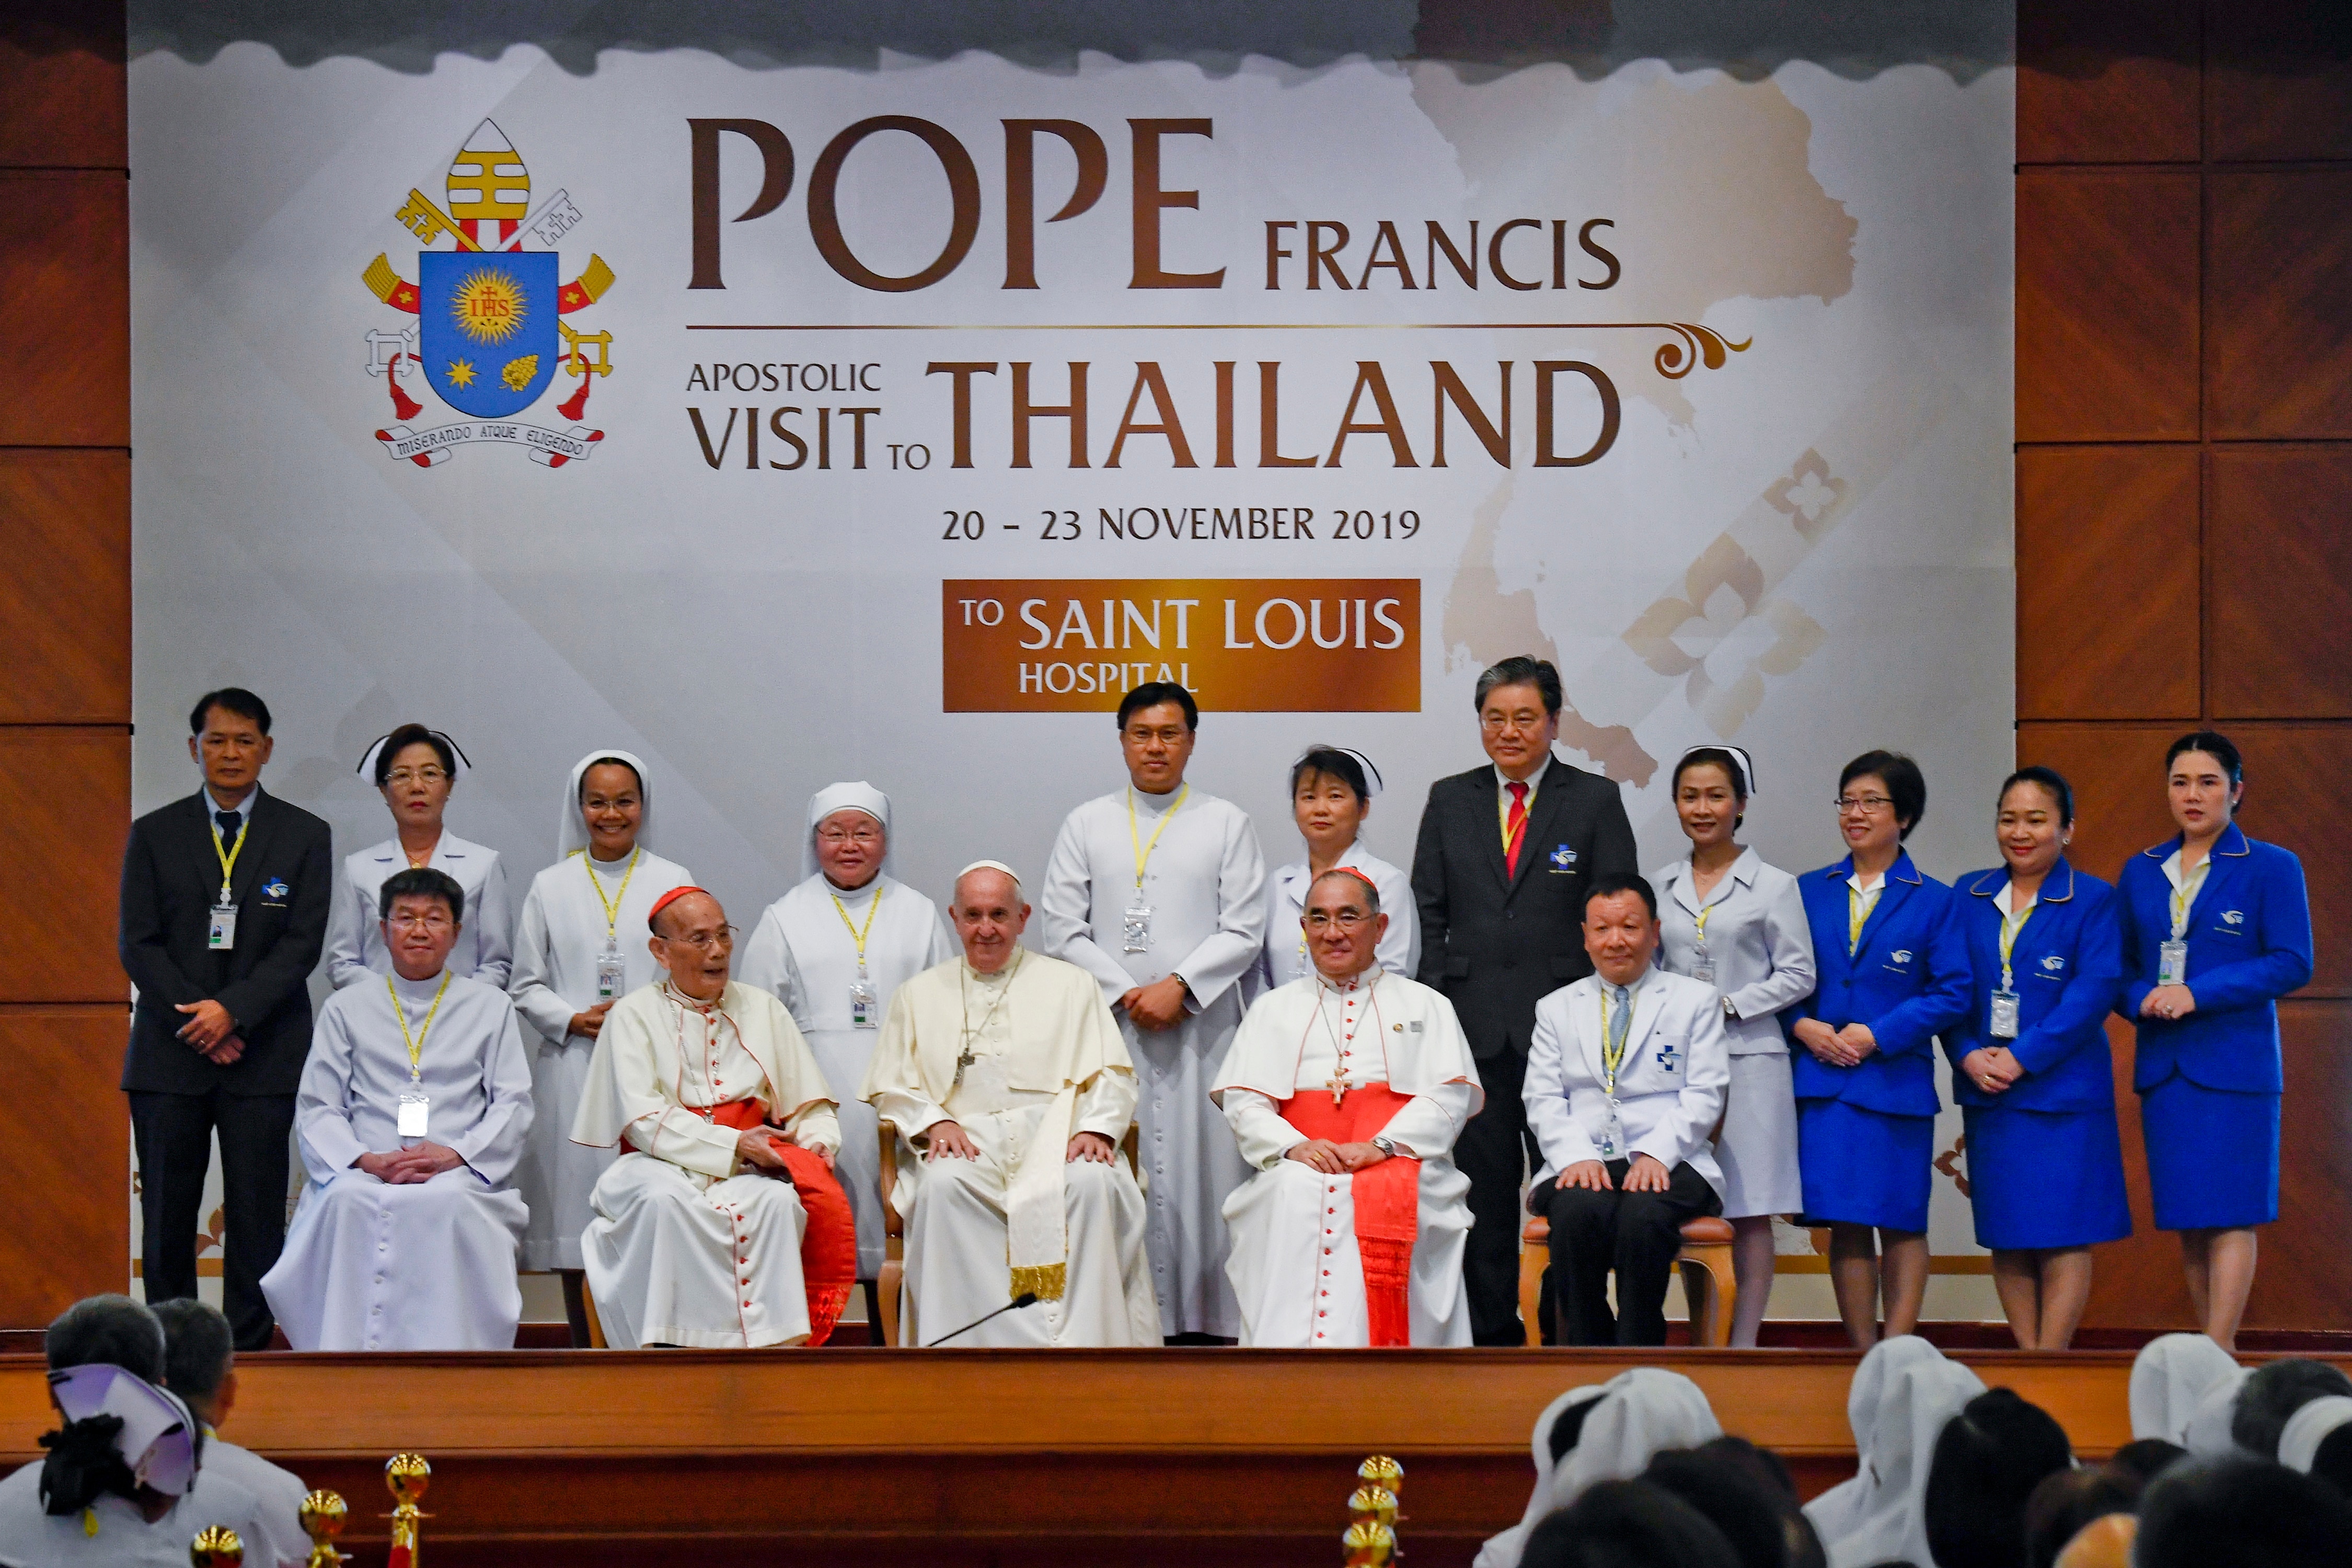 The Pope at St. Louis Hospital in Bangkok, Thailand as part of an apostolic visit on the occasion of the 350th anniversary of the founding of Mission de Siam. 